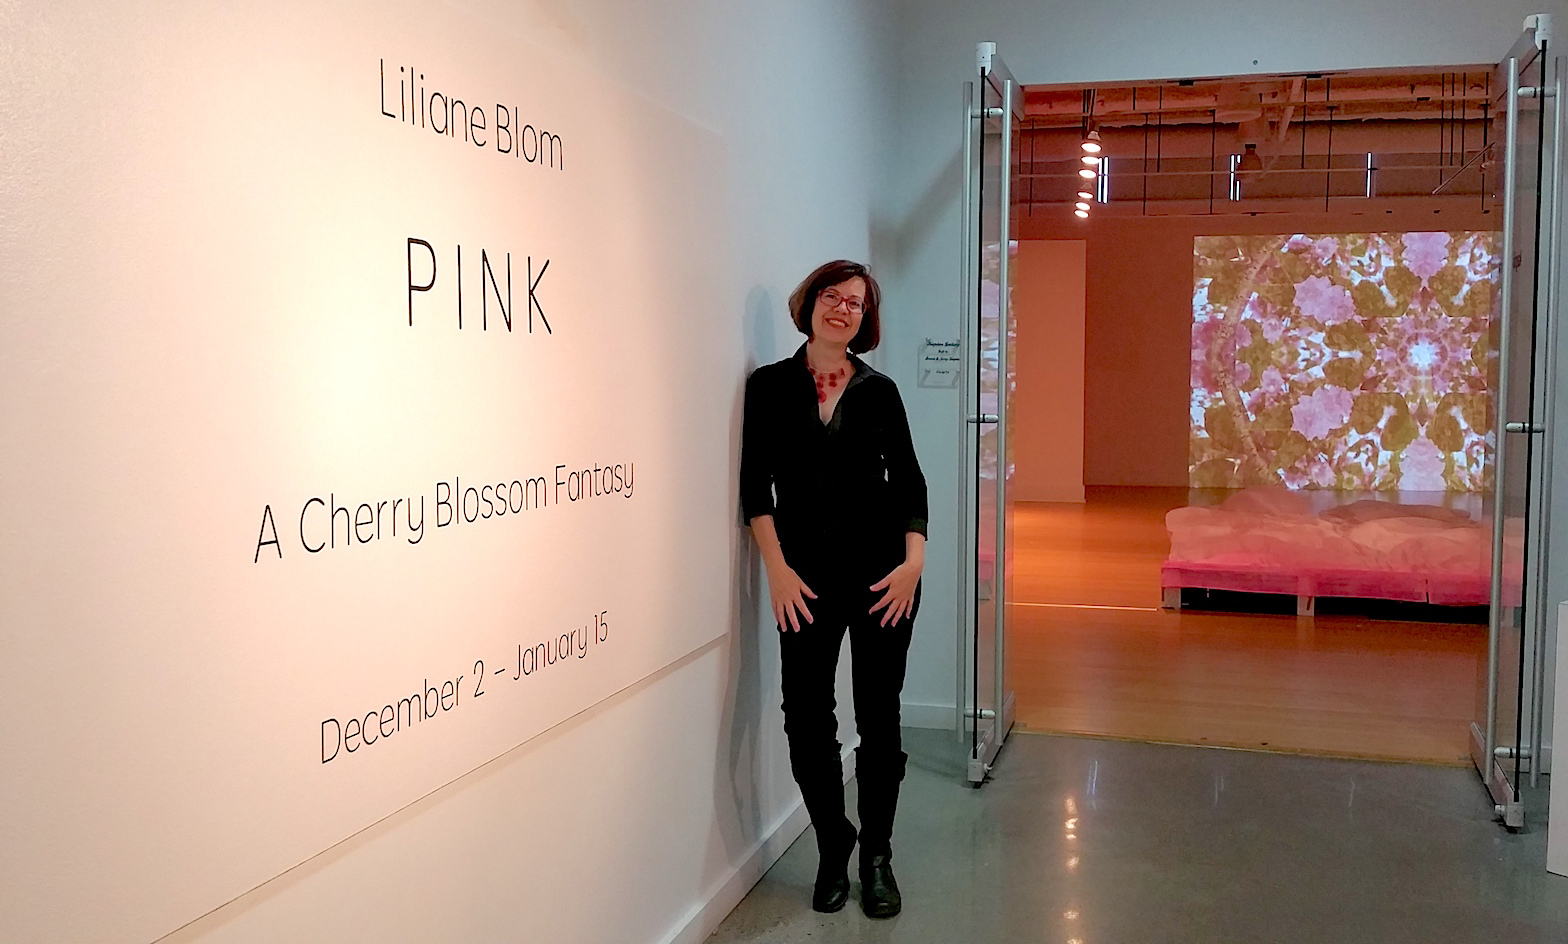 Gallery 1 - Liliane Blom at the entrance to her exhibit, “Pink – A Cherry Blossom Fantasy,” at VisArts in Rockville.